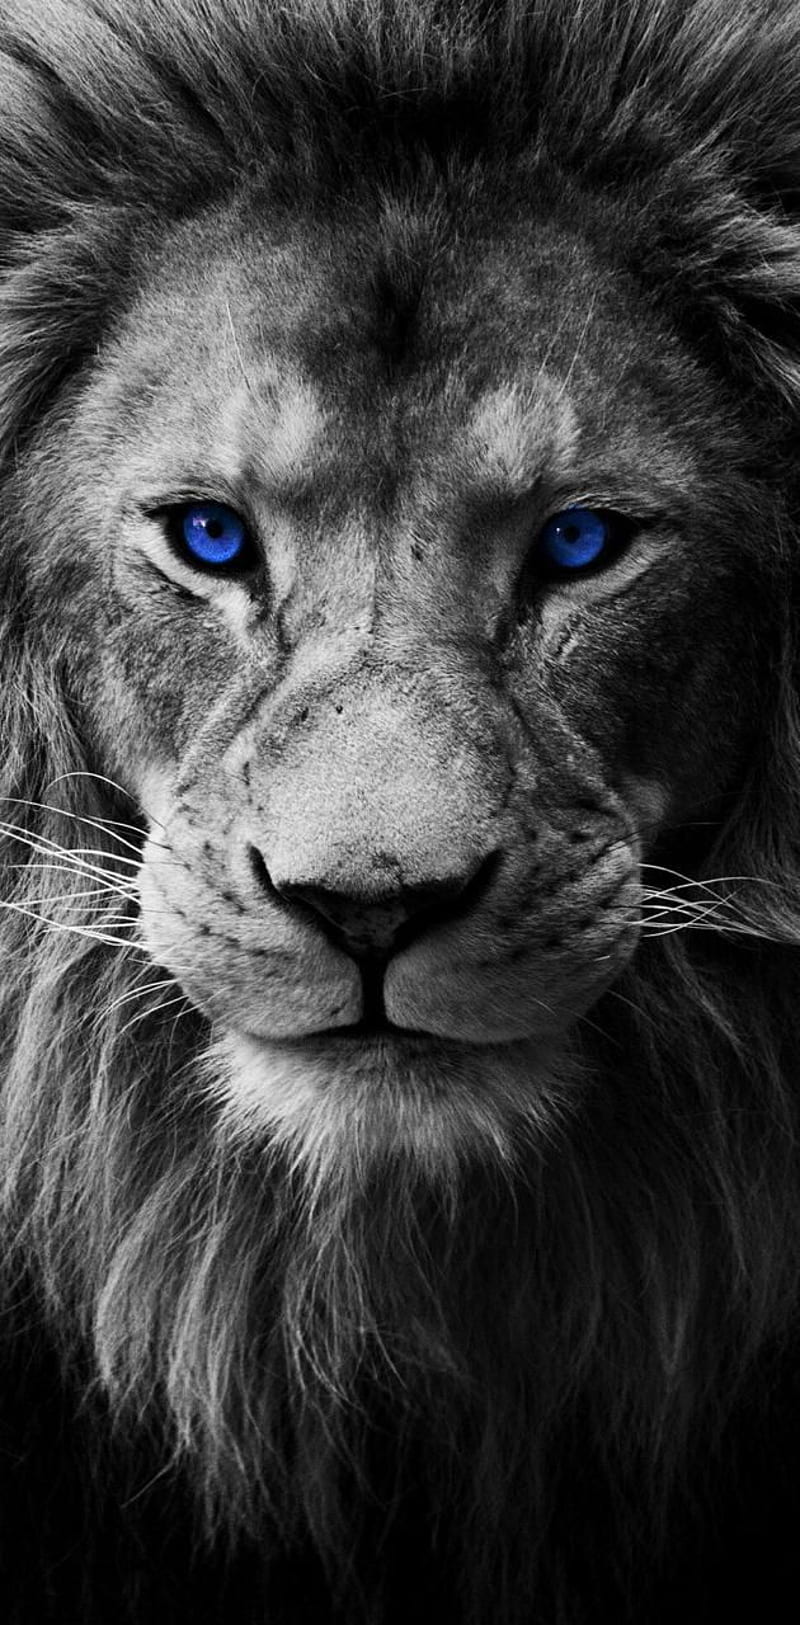 Lion by Beast_chevy05 - 2f6b now. Browse millions of popular blue ...